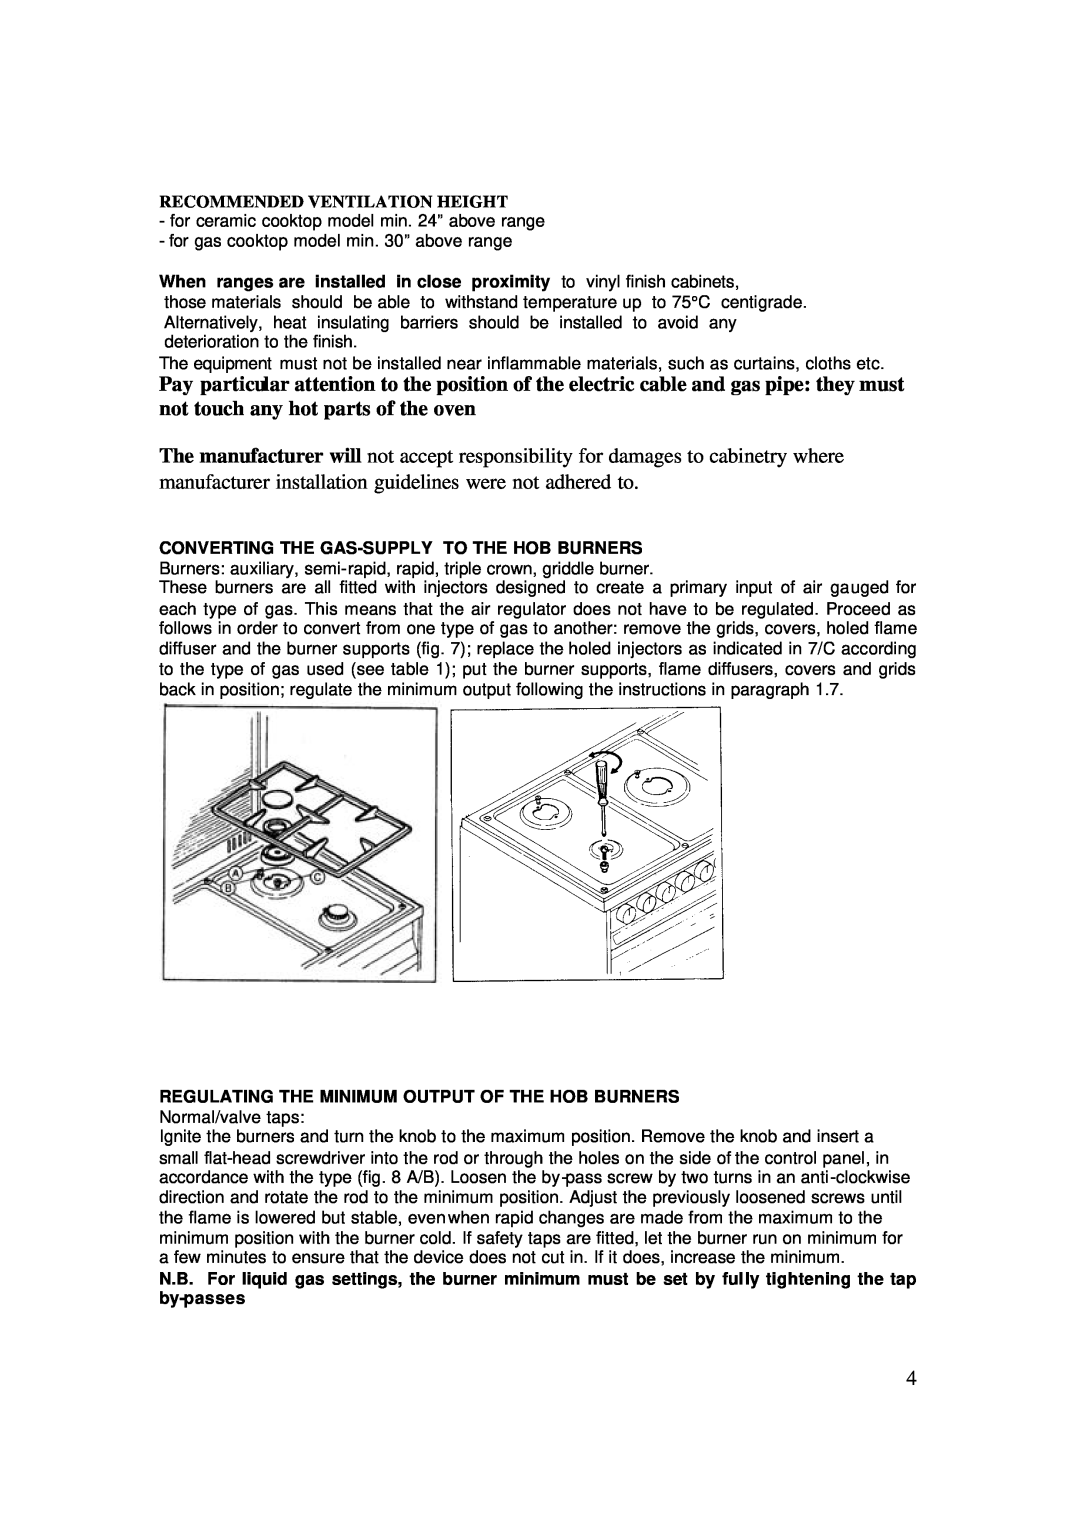 AEG 4006G-M user manual Recommended Ventilation Height, Regulating The Minimum Output Of The Hob Burners 